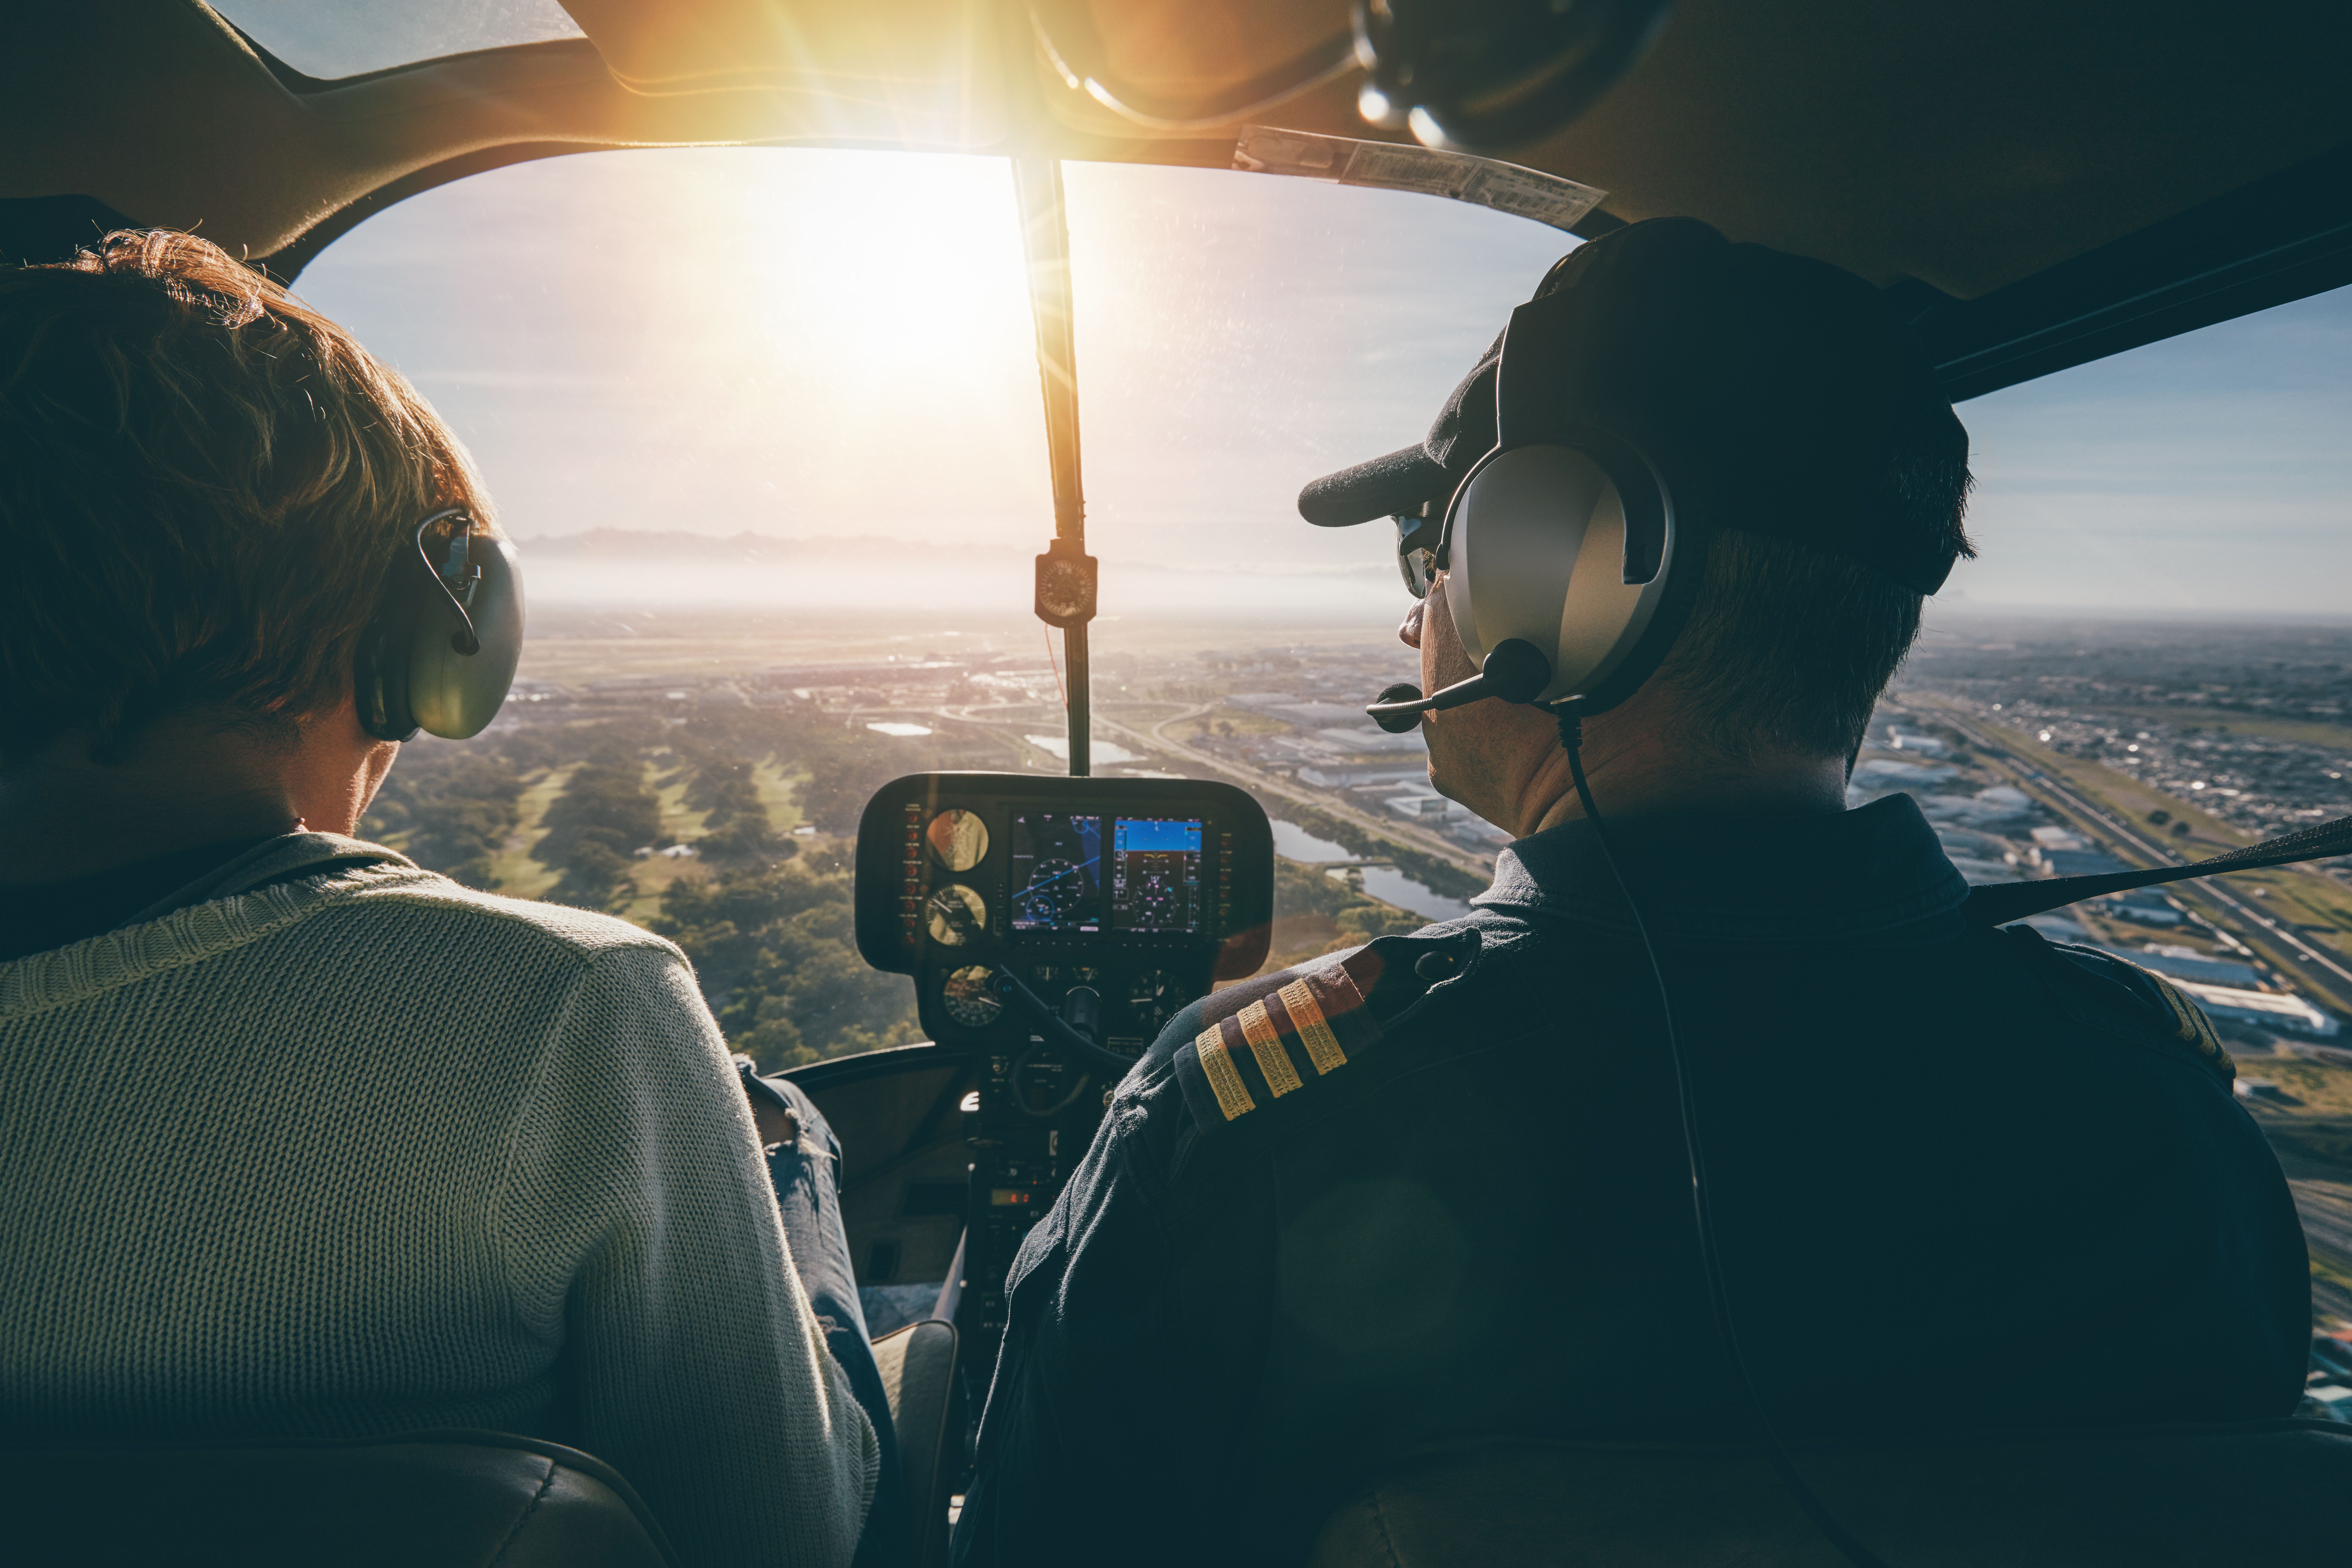 An instructor and student facing the sun in the flight.